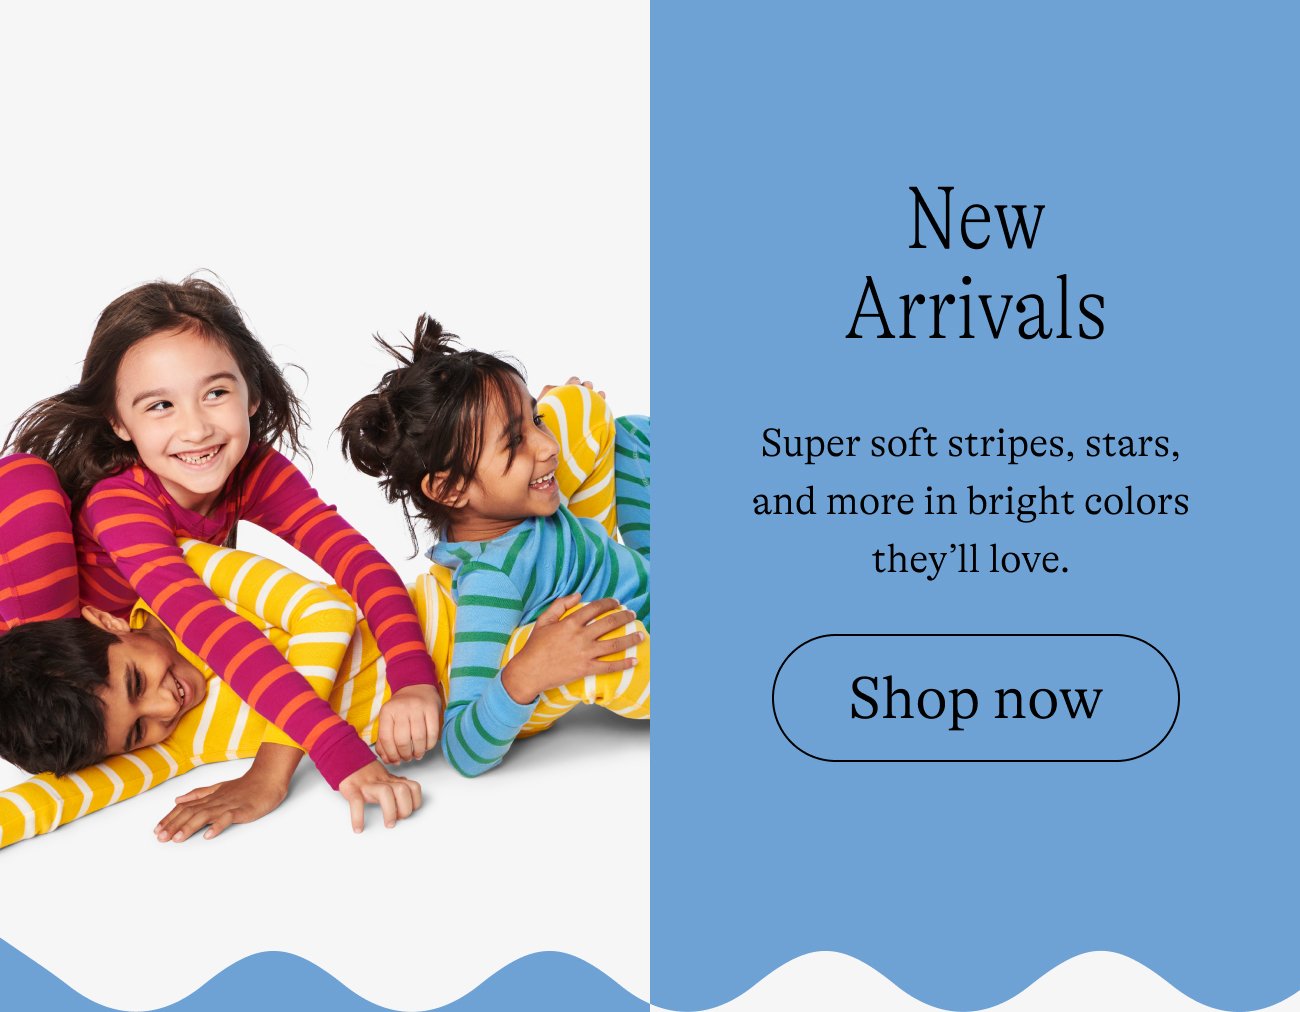 New Arrivals: Super soft stripes, stars, and more in bright colors they’ll love. Shop now.